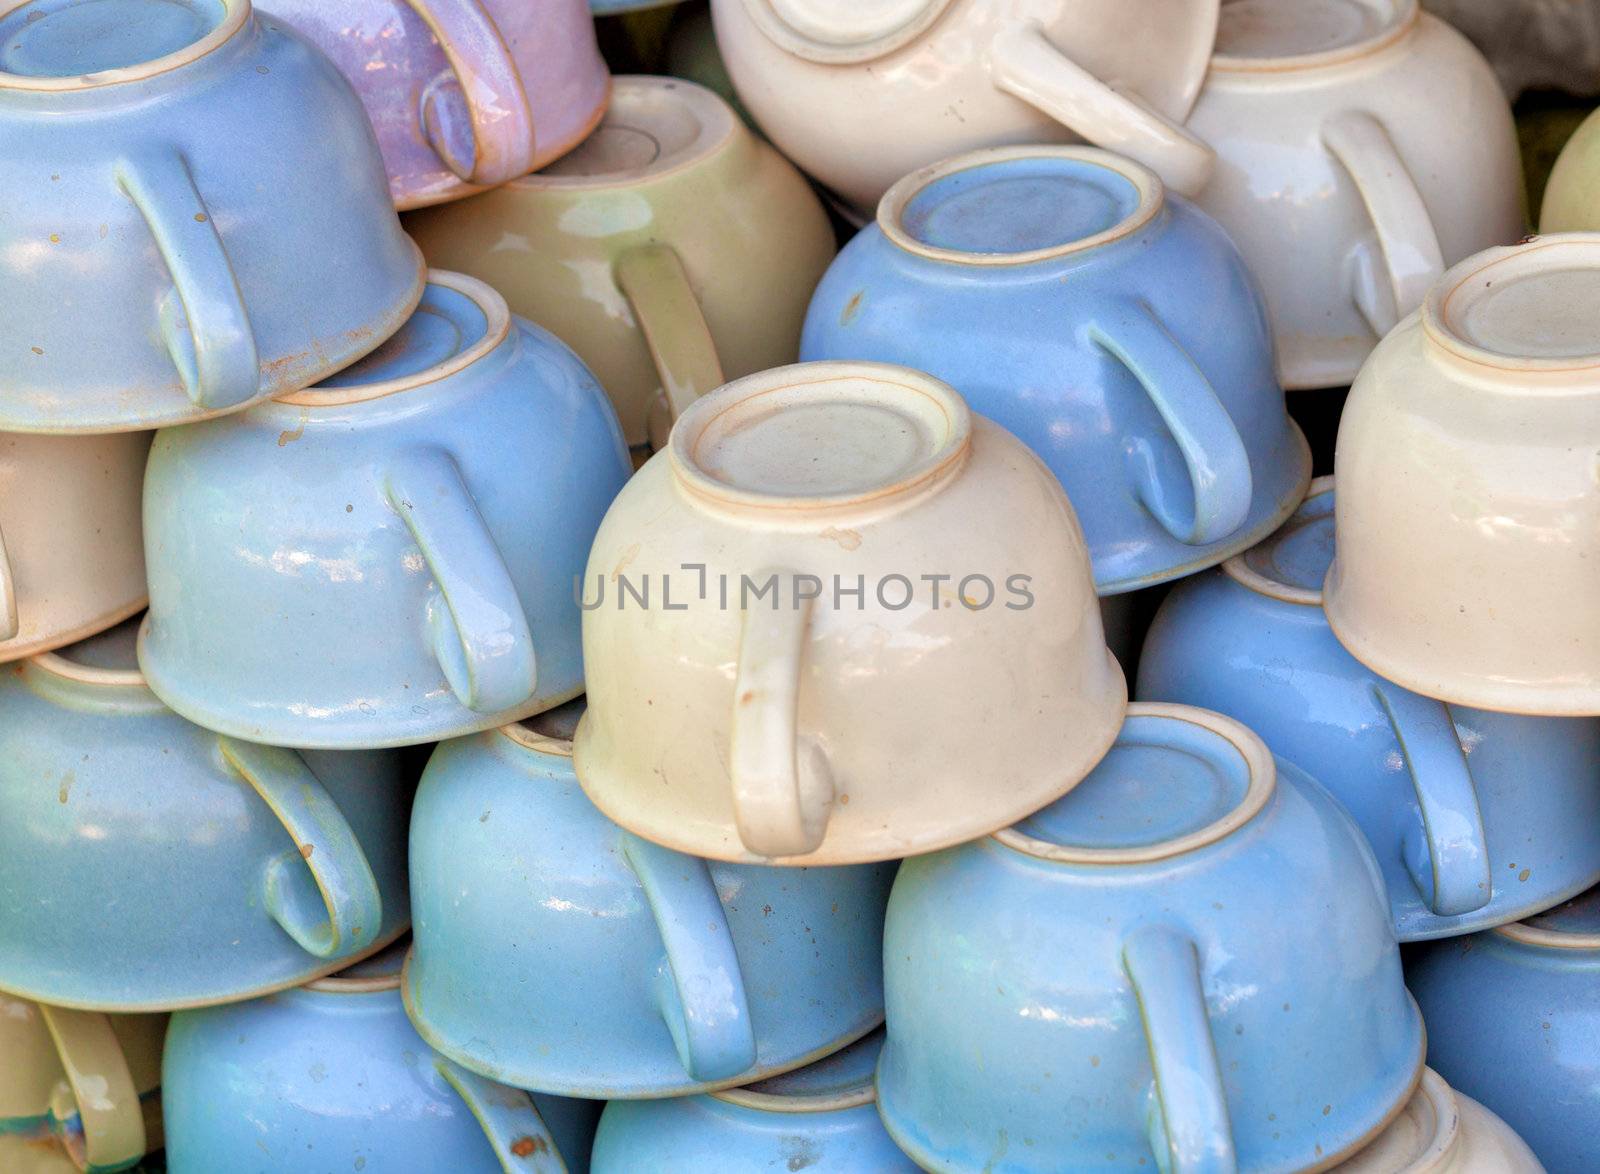 A large pile old-fashioned ceramic chamber pots on the market